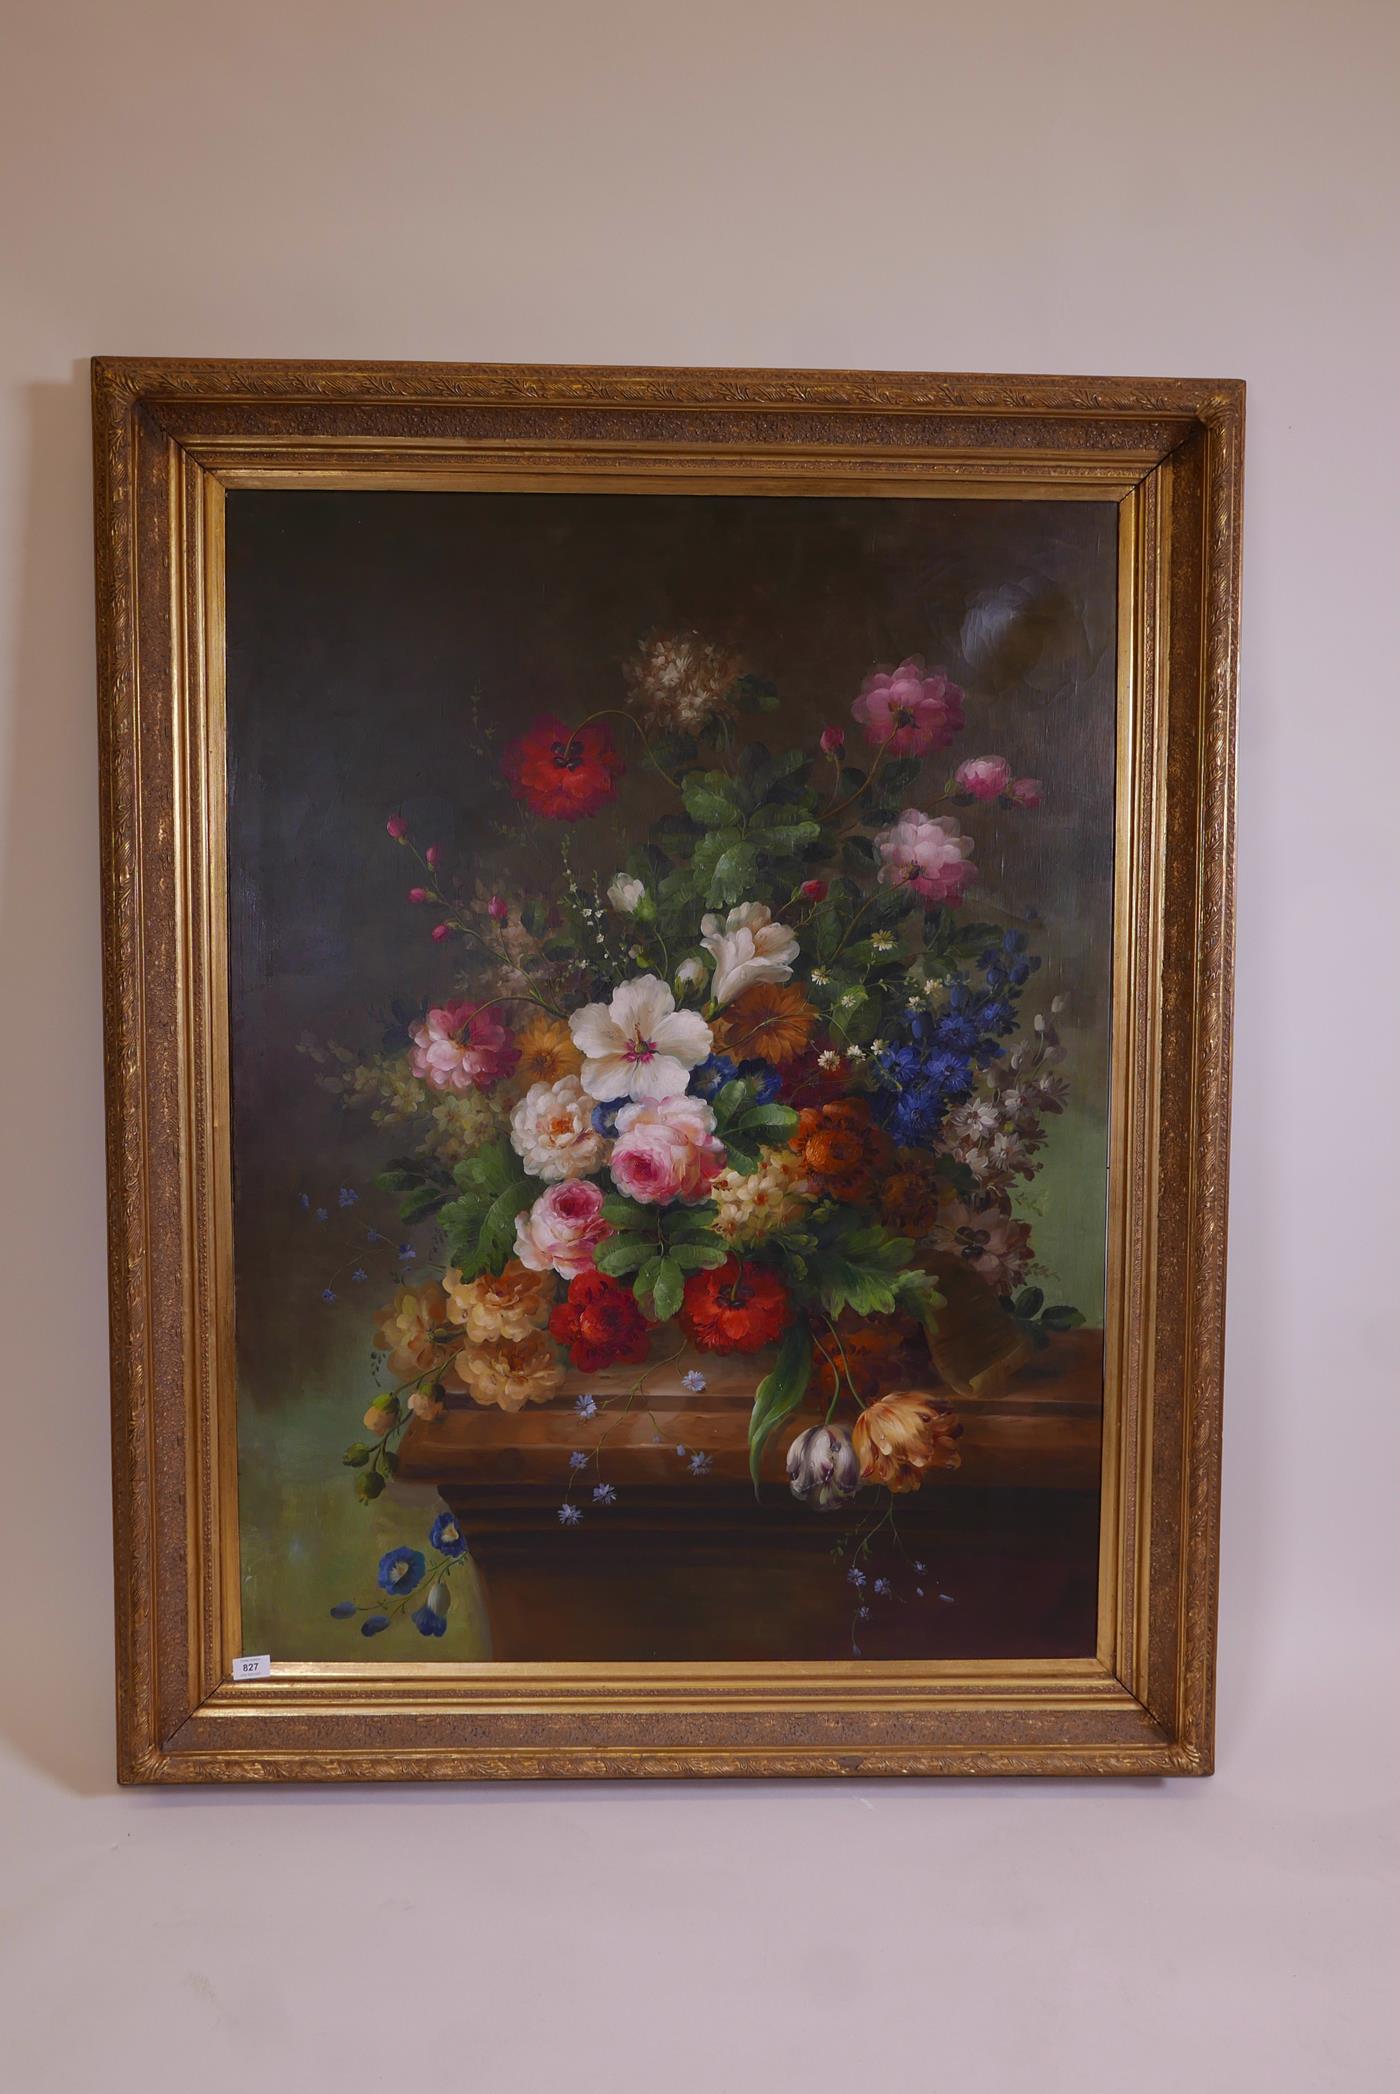 A Dutch style floral still life, oil on canvas, in a gilt frame, unsigned, late C20th, 36" x 48" - Image 2 of 4